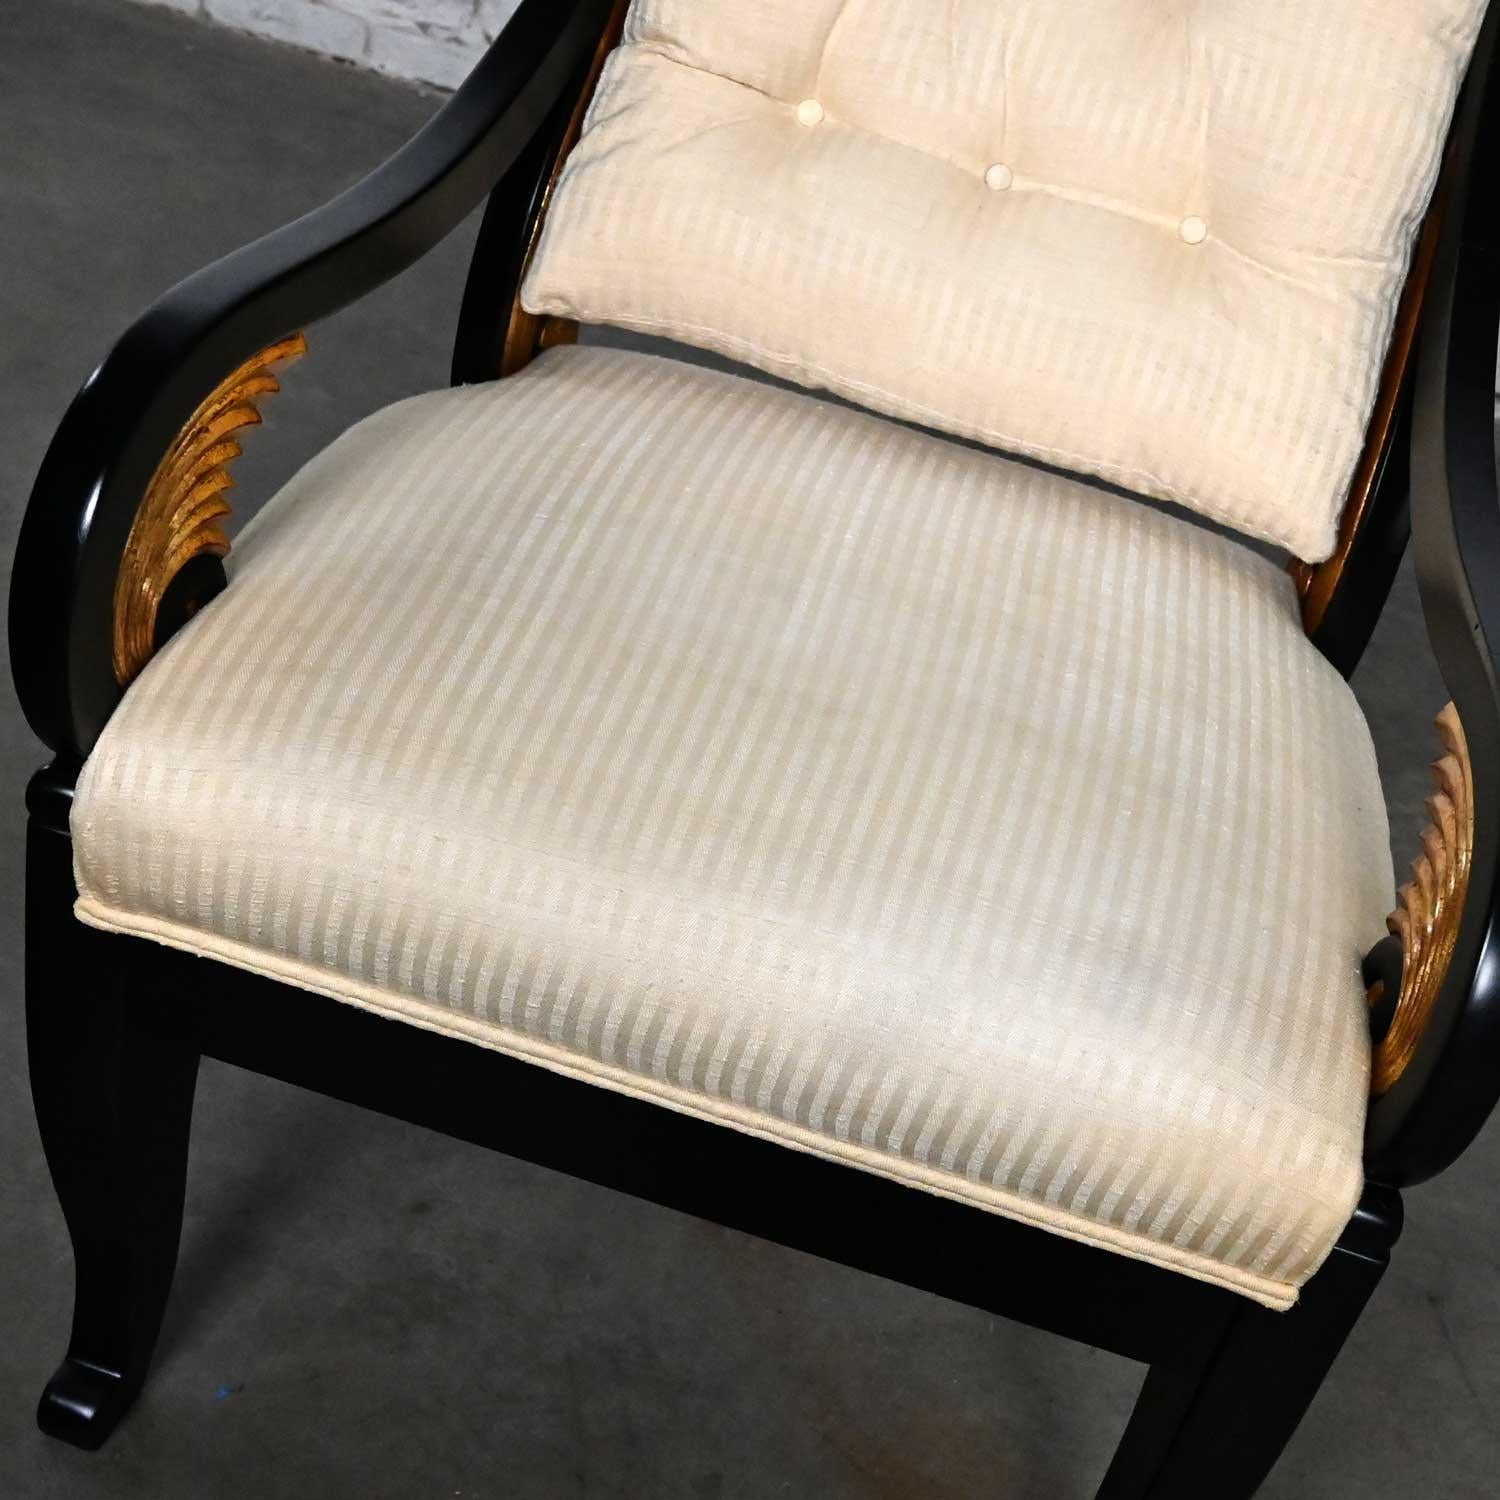 Late 20th Neoclassic Revival Black Side Chair Gilt Wing Accents Off-White Fabric For Sale 7